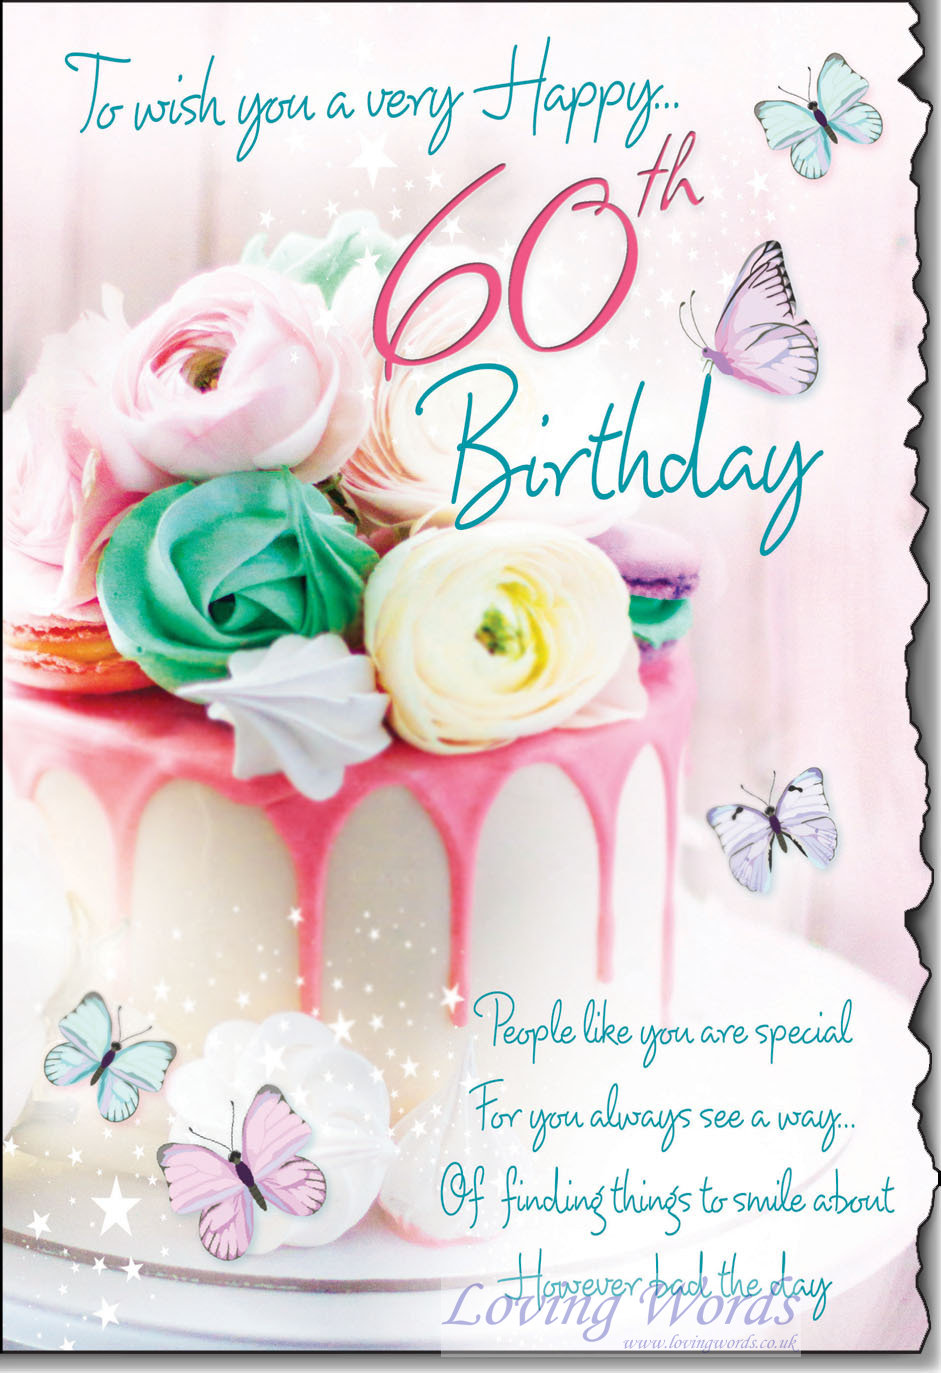 Very Happy 60th Birthday | Greeting Cards by Loving Words